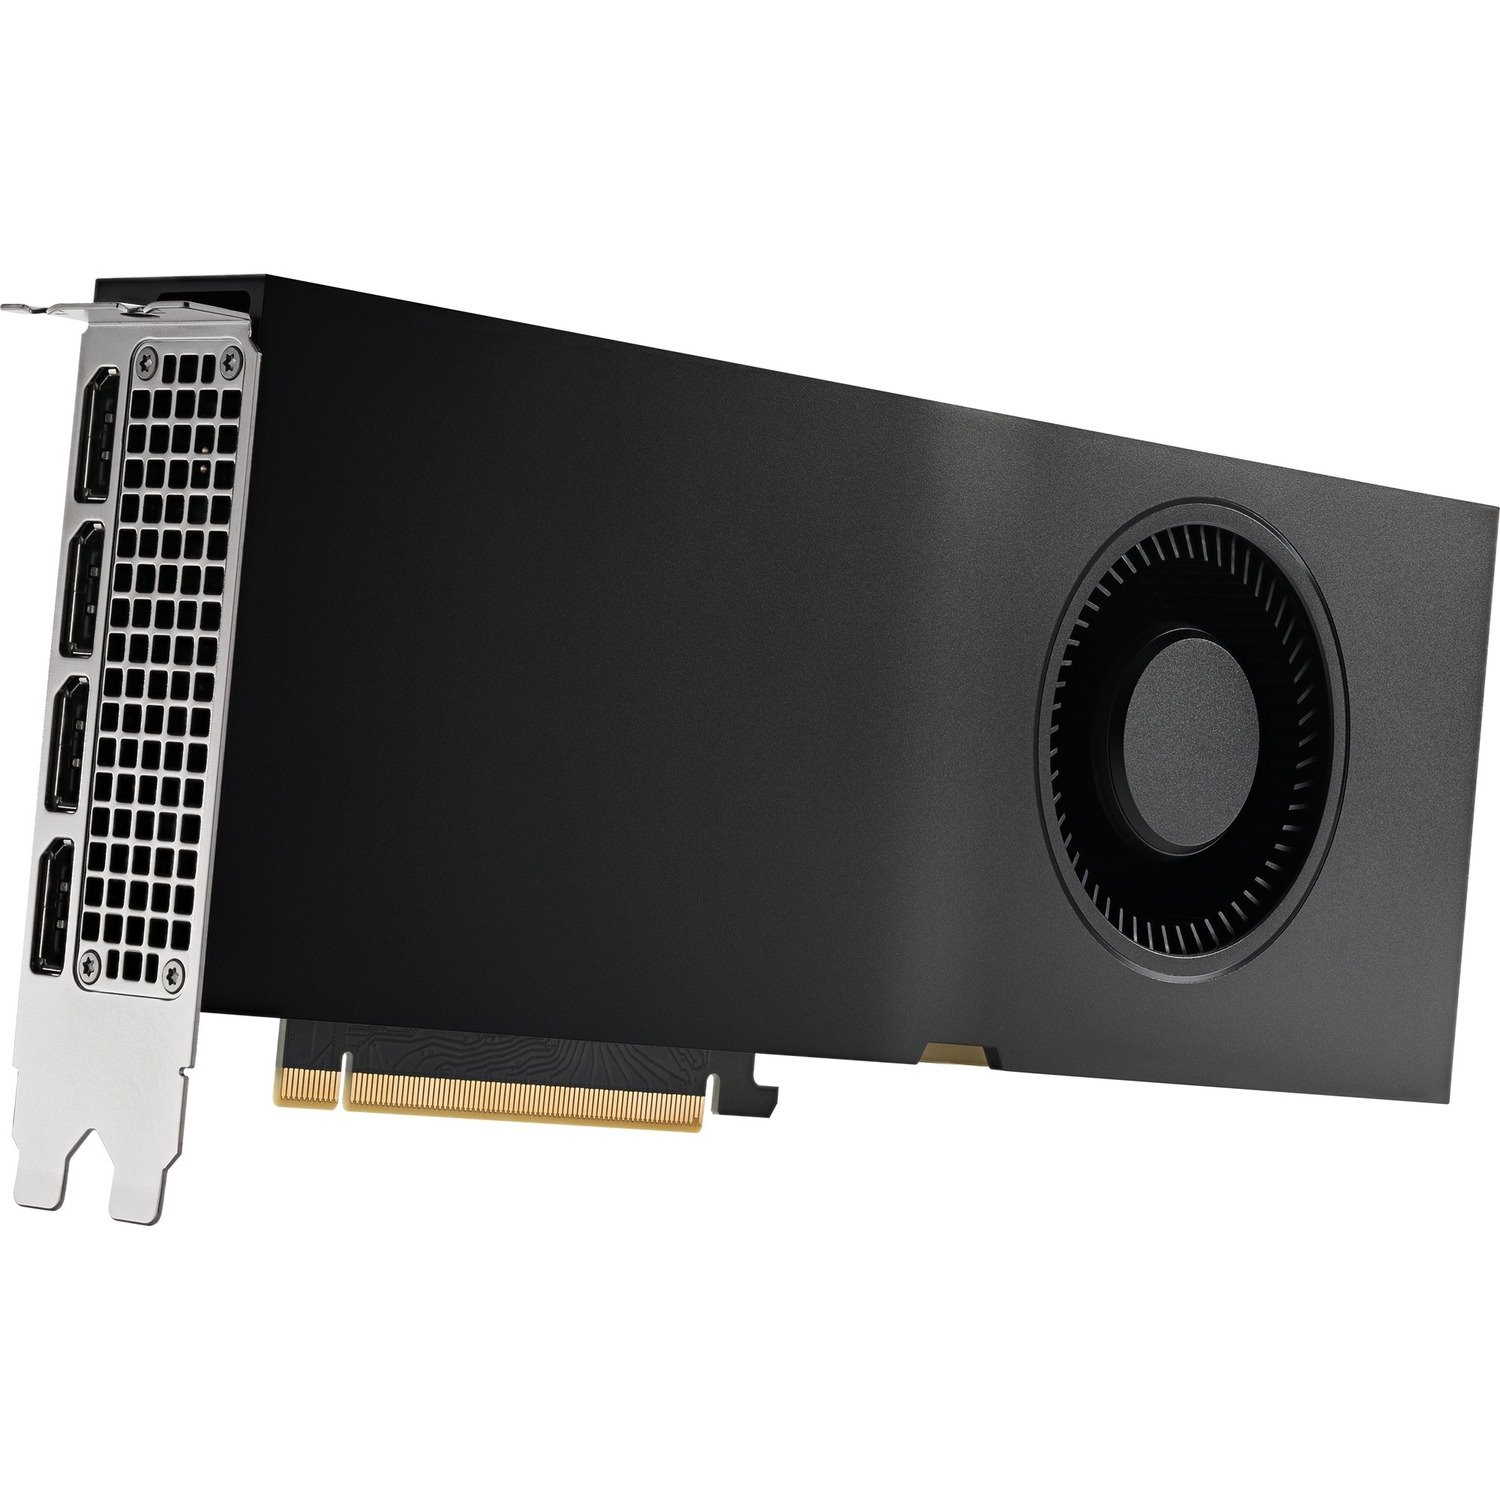 PNY NVIDIA RTX A5000 Graphic Card - 24 GB GDDR6 - Full-height/Low-profile